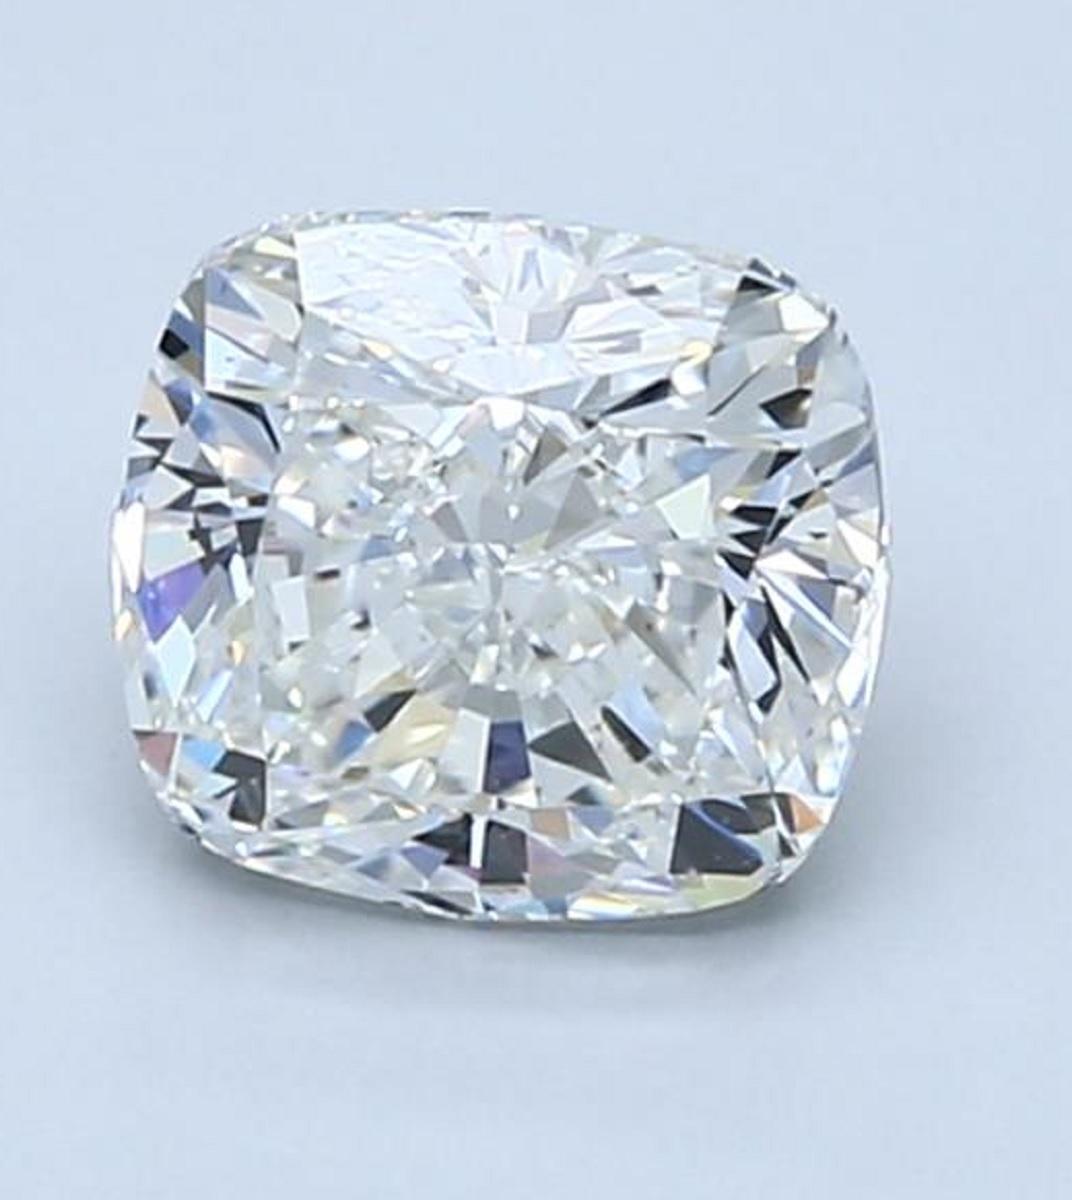 This excellent quality 2.51 carat diamond is certified by HRD Antwerp, a well respected European lab. There are no brown, green or milky shades and no cloudiness actually is a very bright I Color. The diamond's bright white color is well